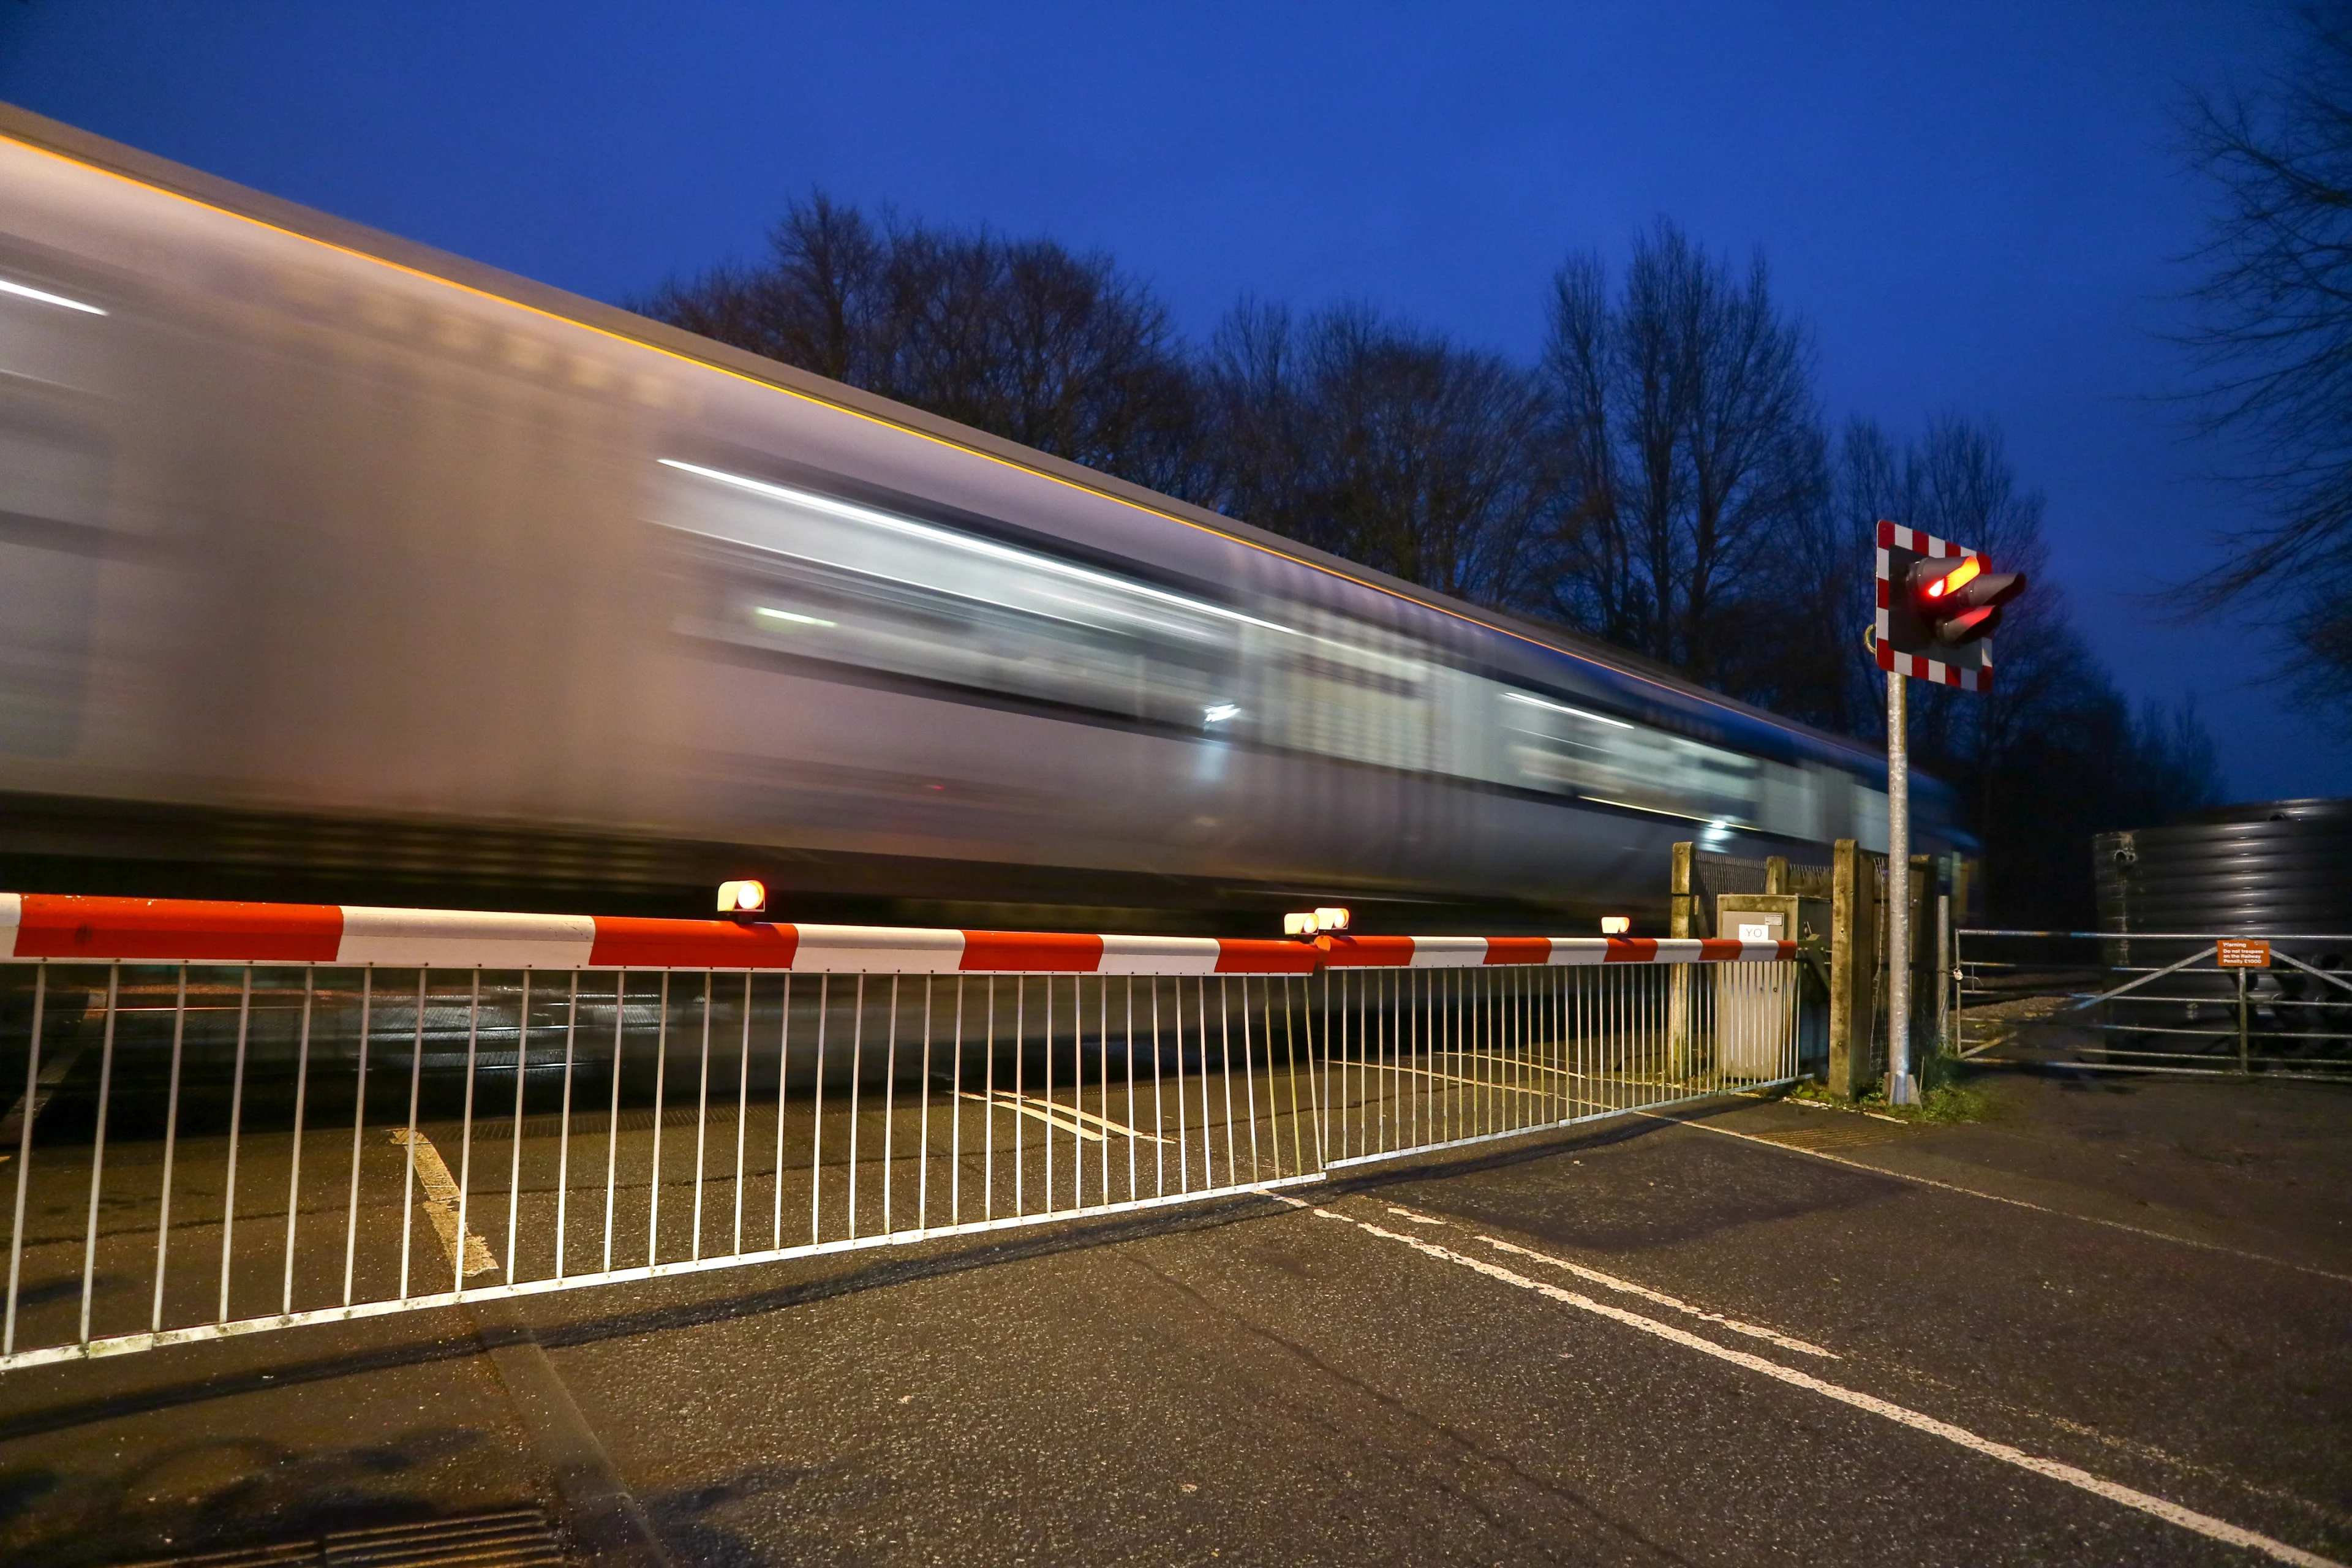 A train travelling at high speed past a level crossing with the barrier down and a red light signal